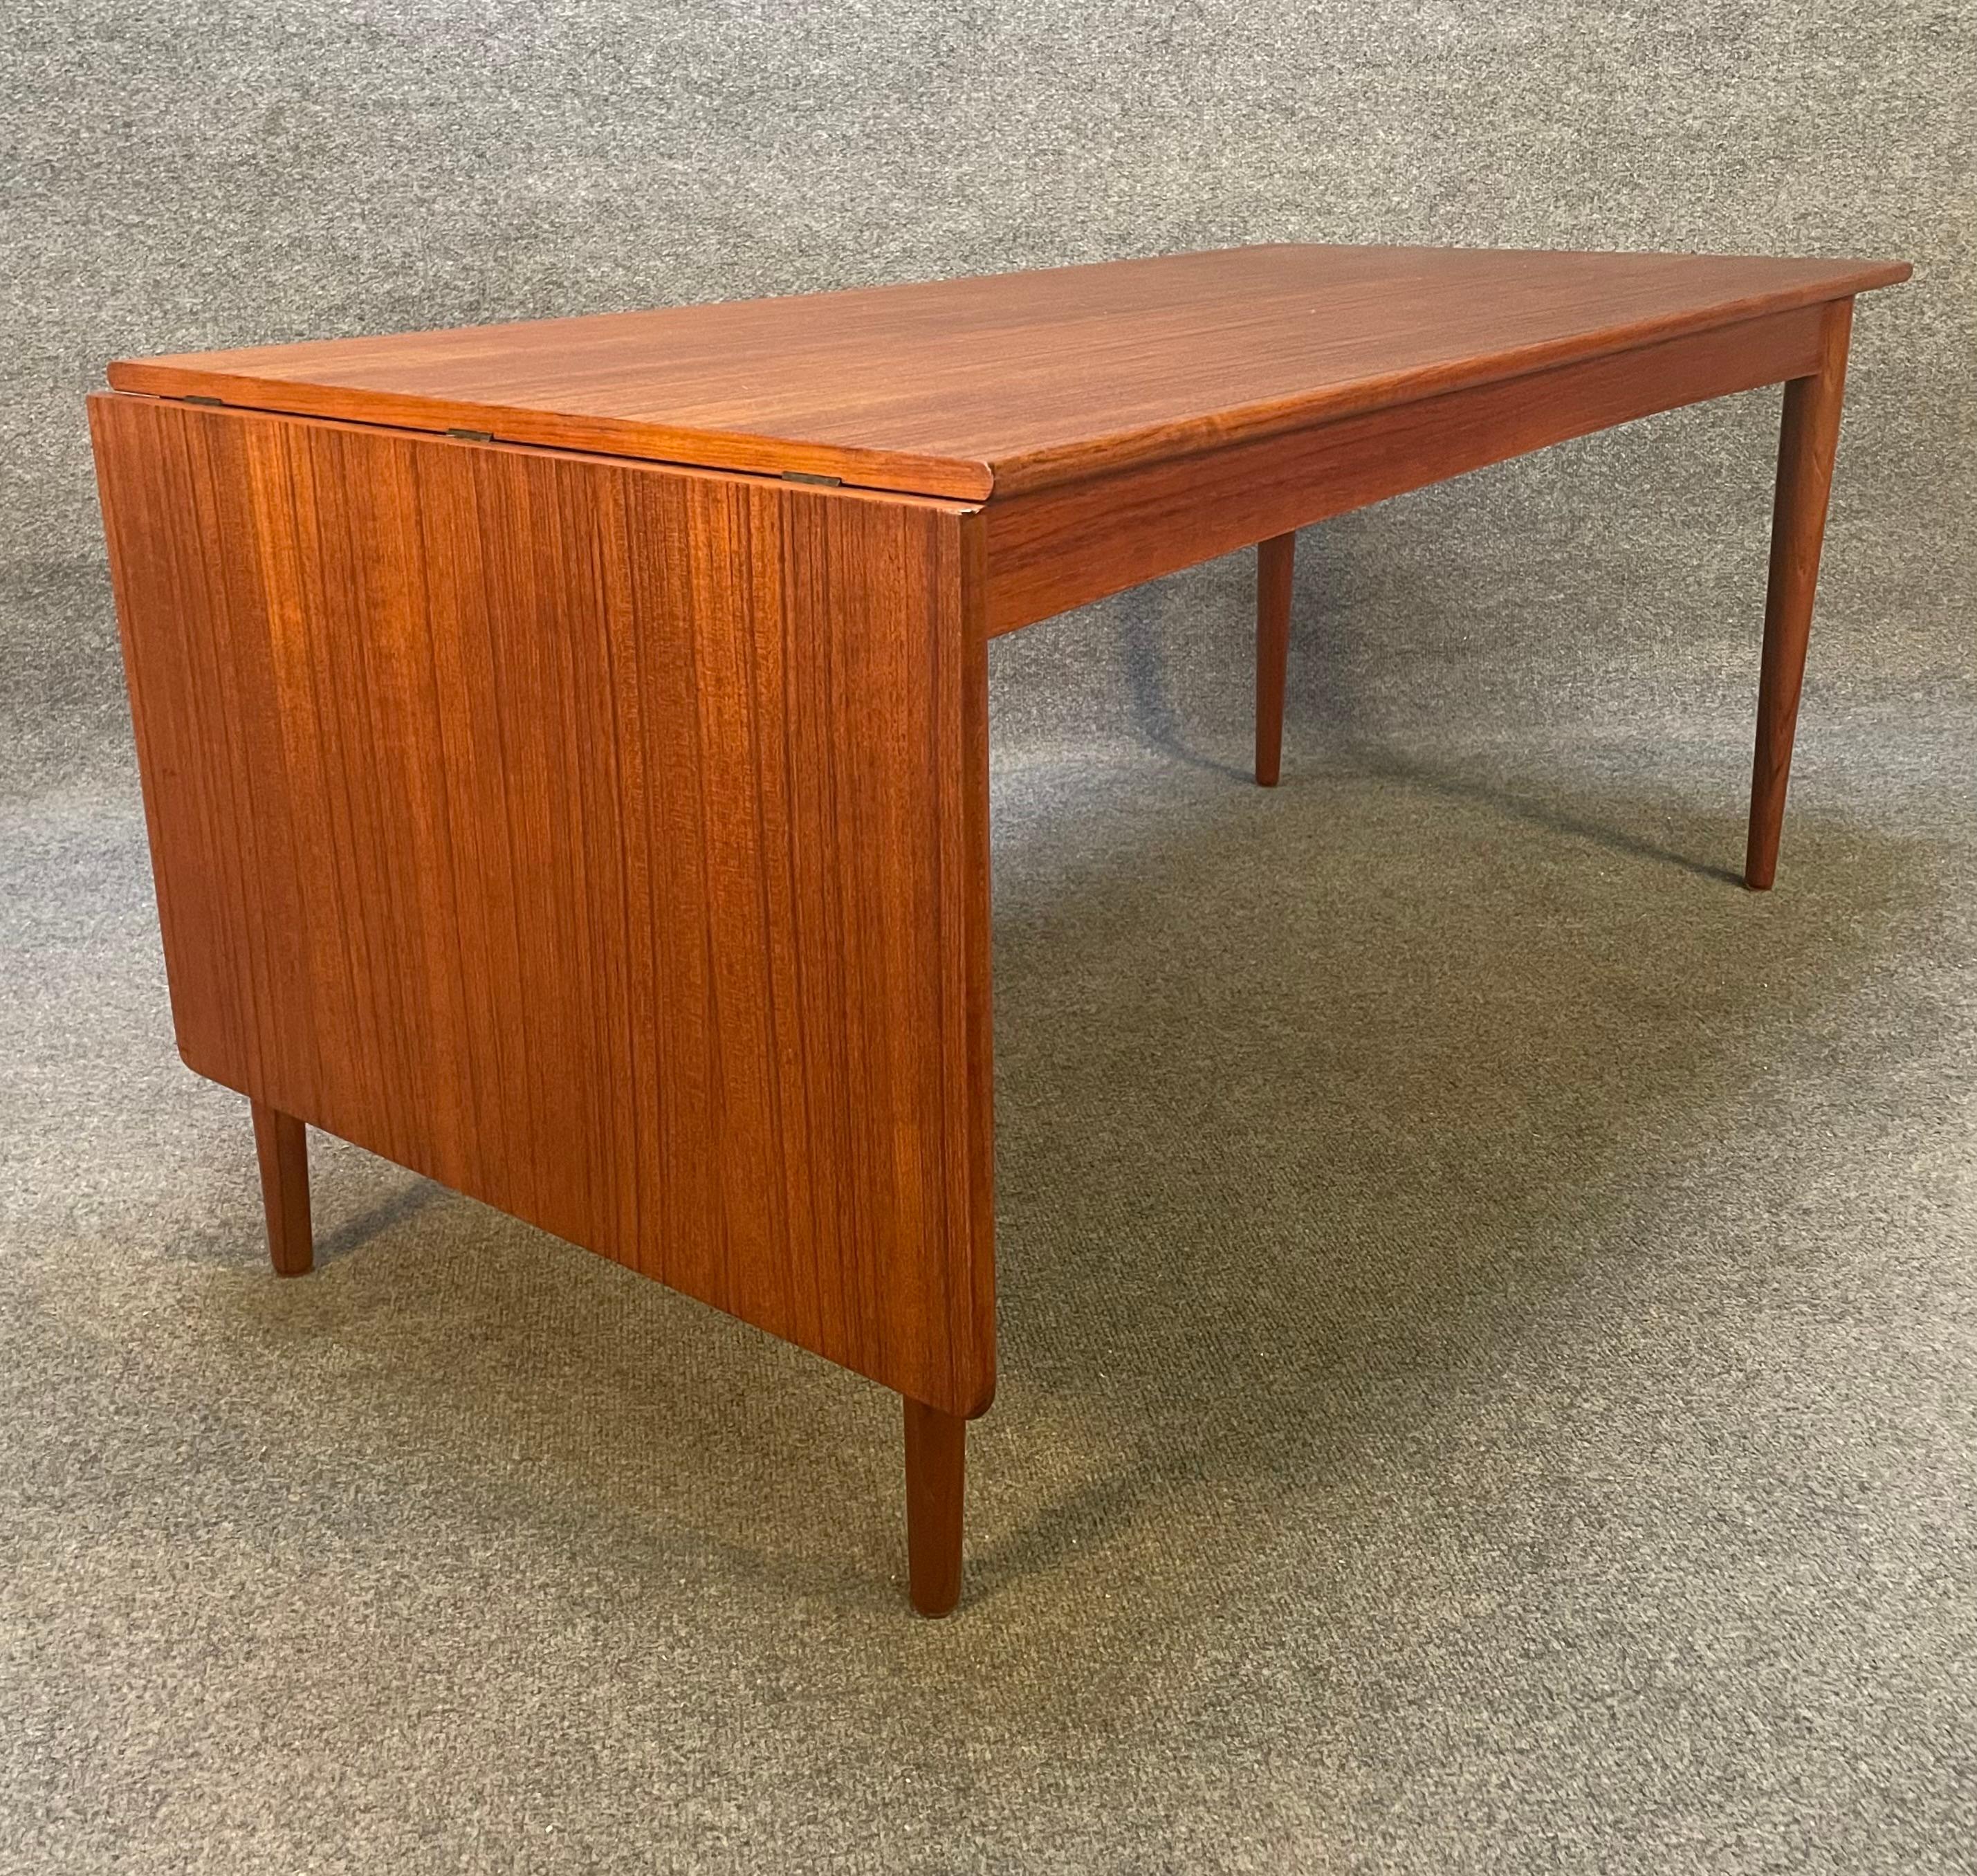 Here is a beautiful 1960's scandinavian modern coffee table in teak wood recently imported from Denmark to California before its refinishing.
This exquisite cocktail table features a vibrant wood grain, a drop leaf and four tapered legs in solid